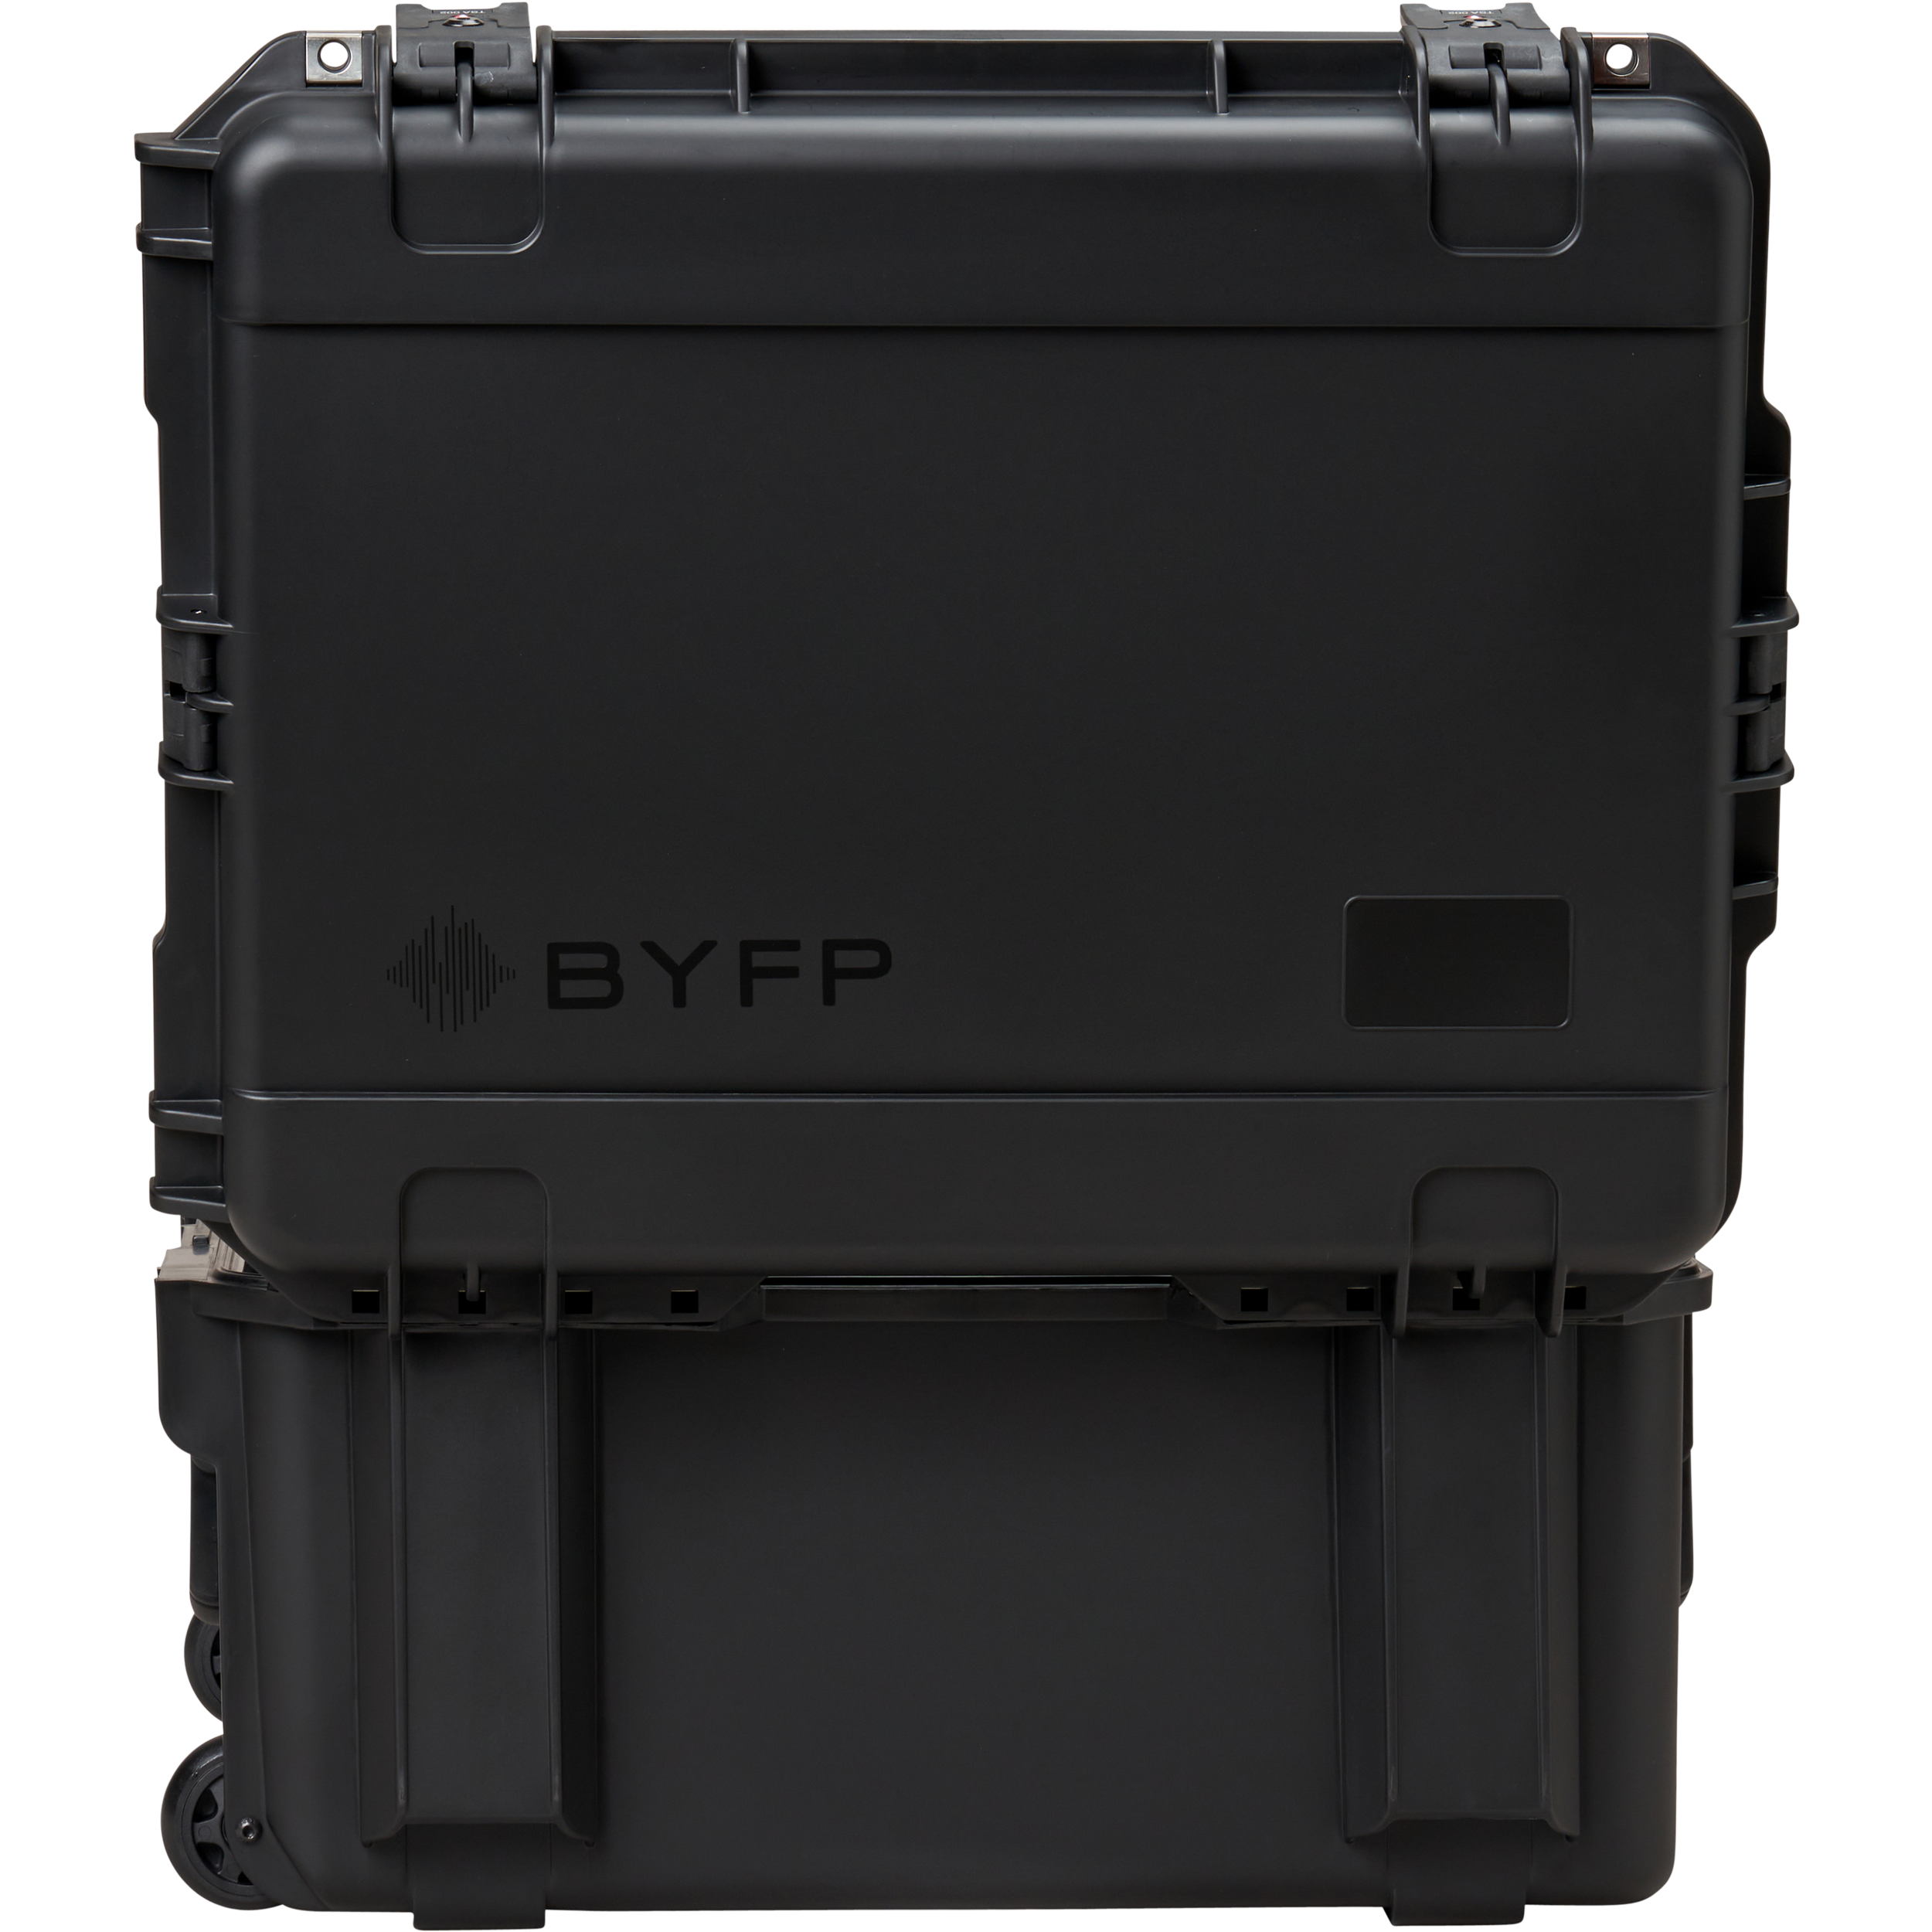 BYFP ipCase Fly Rack for 2U and Wideband Antennas